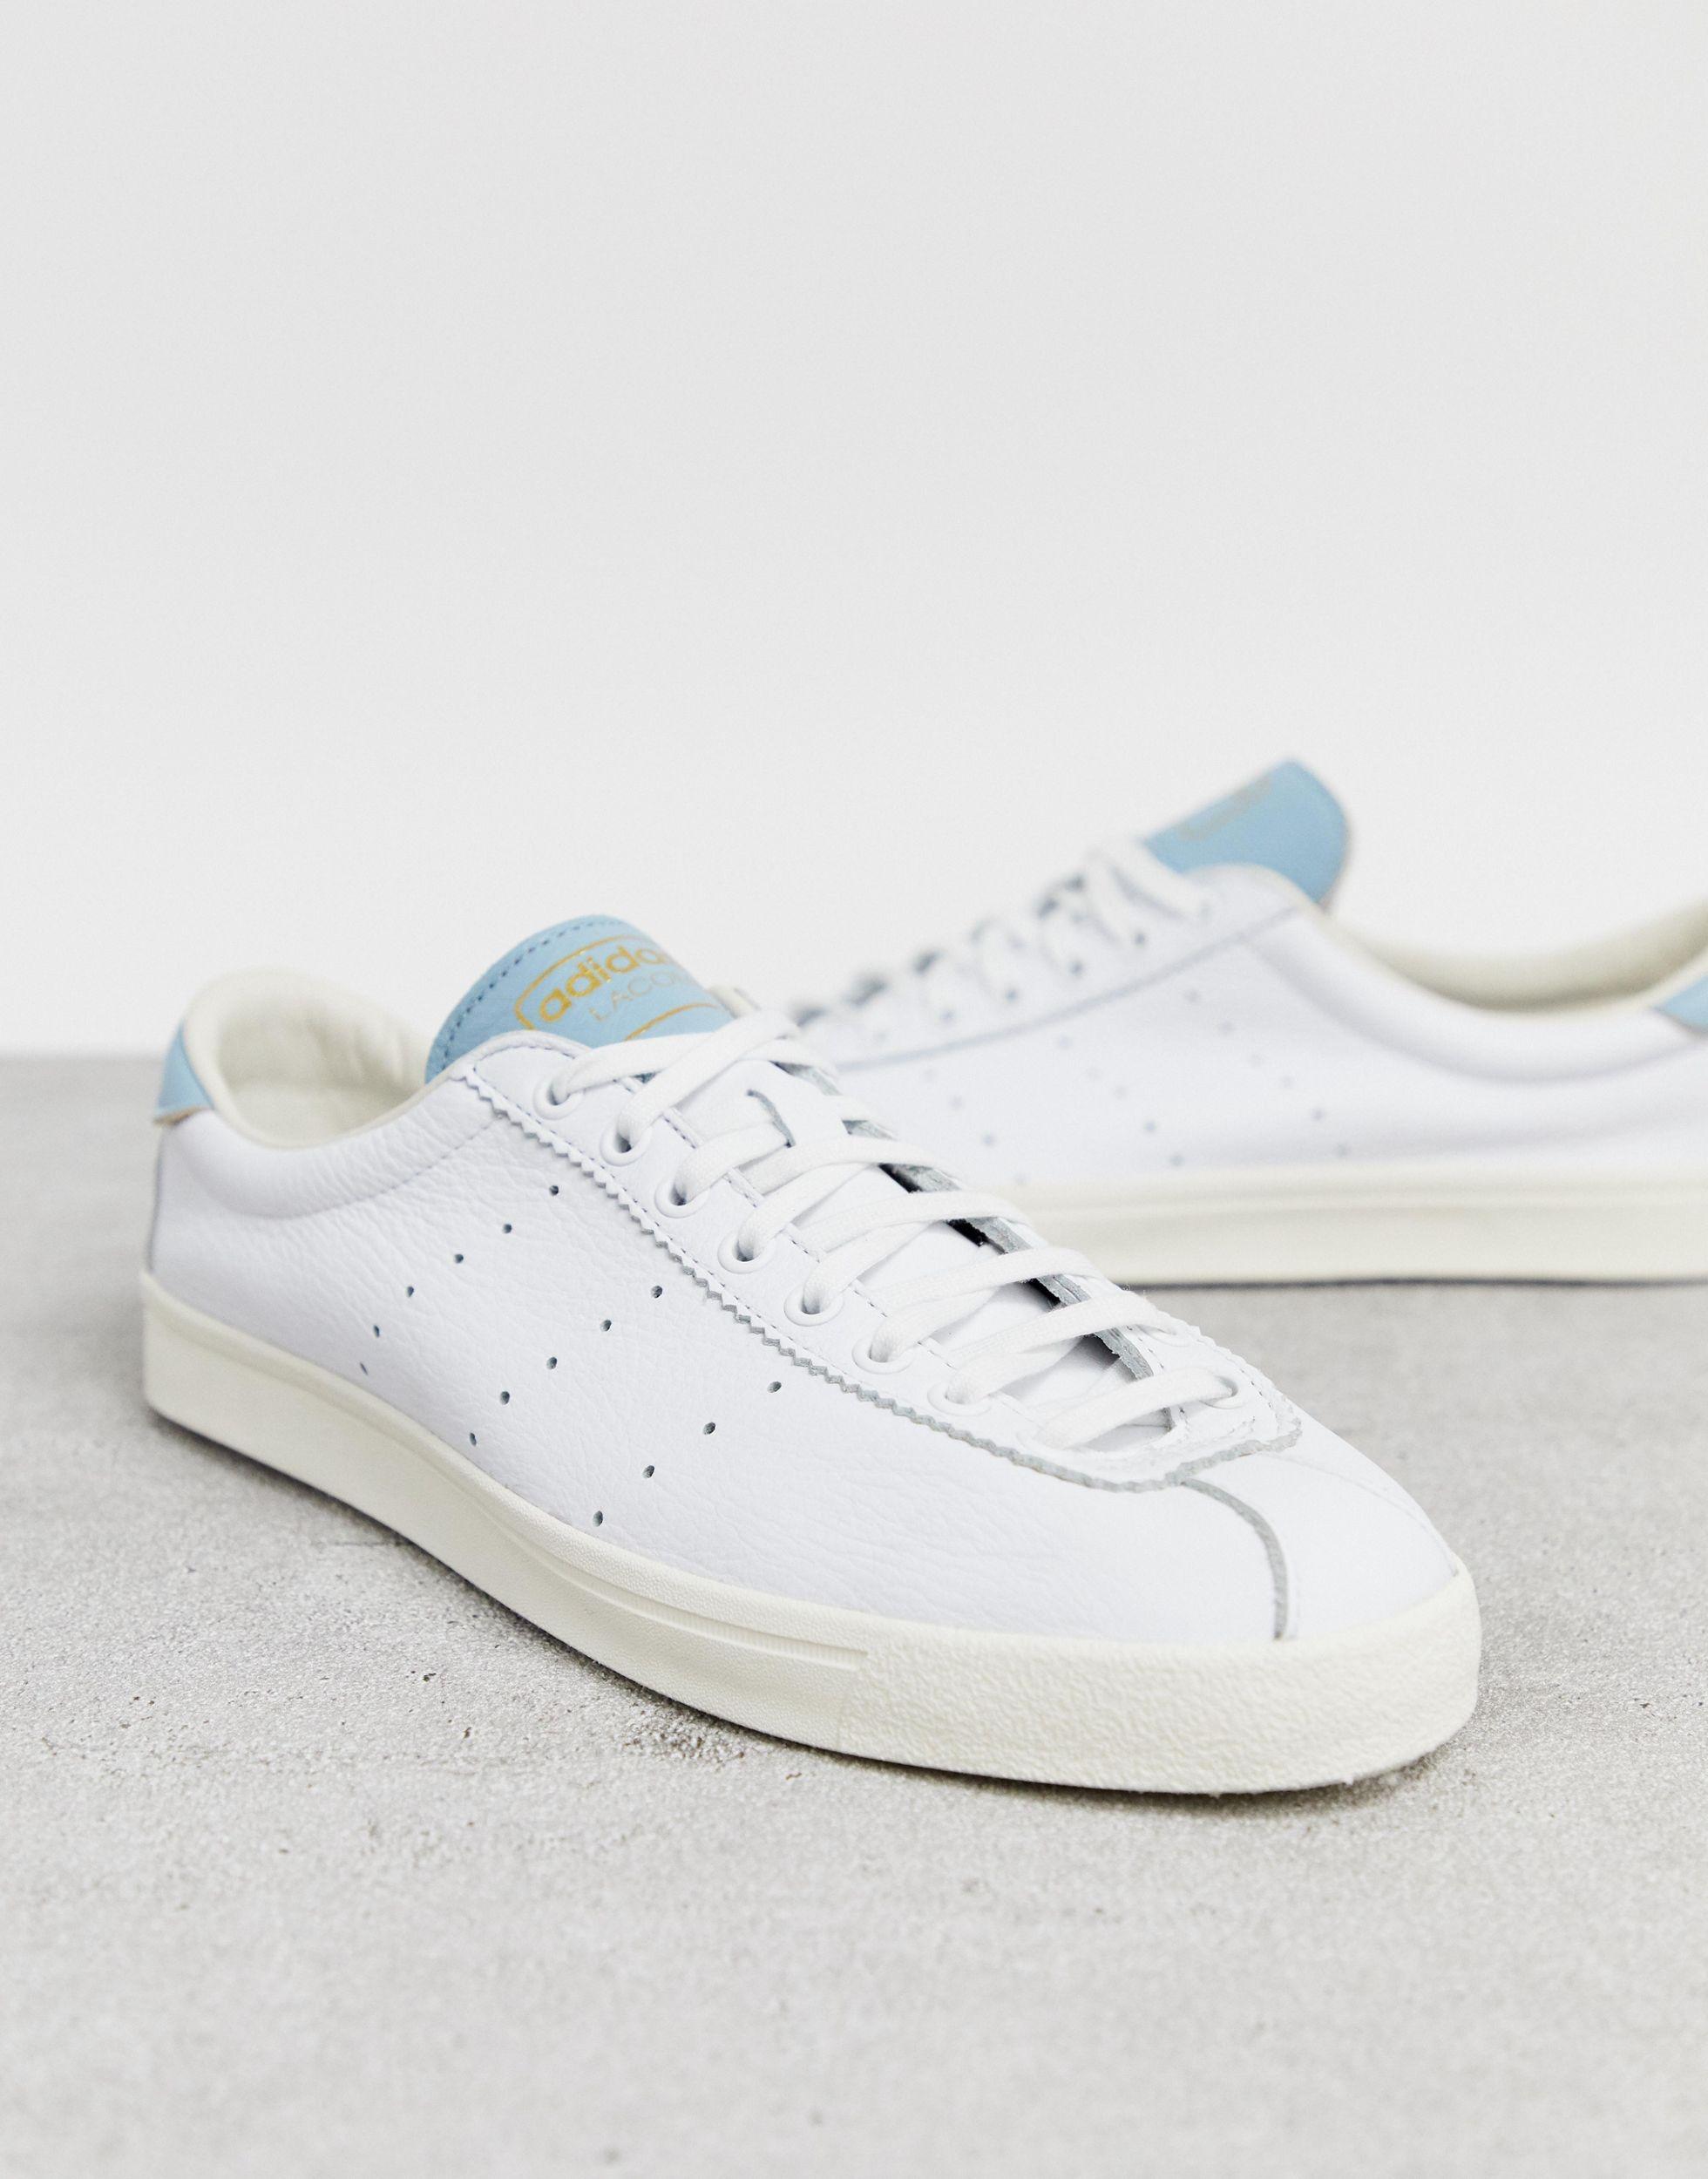 adidas Originals Lacombe Leather Trainers White for Men - Lyst